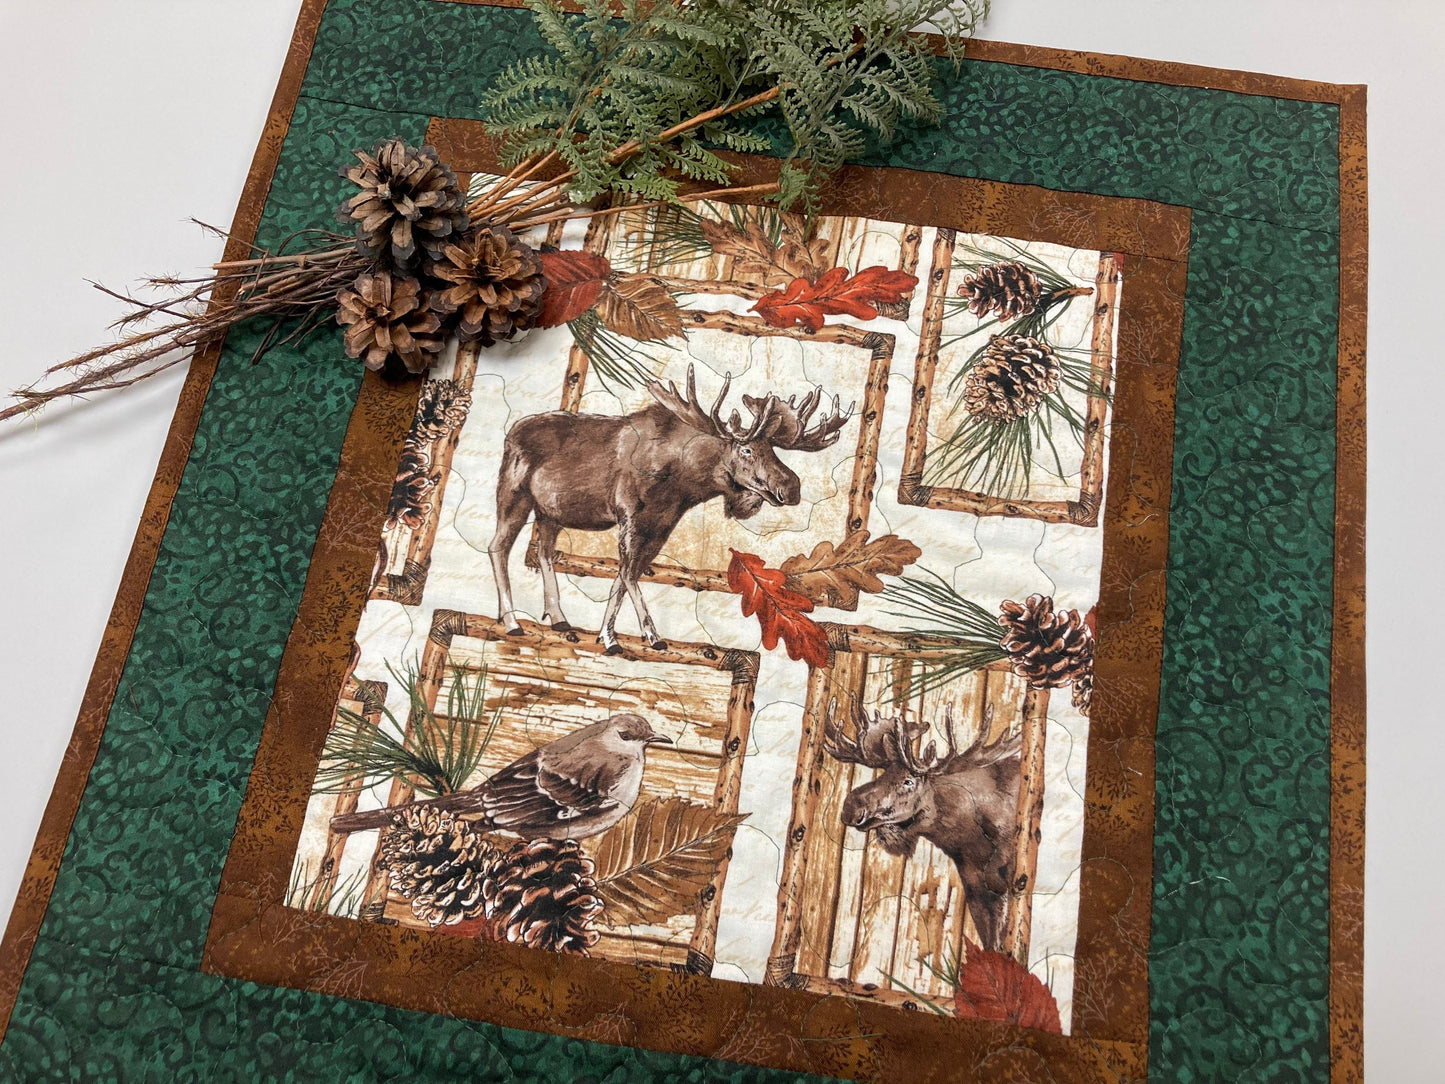 Moose and Bird Leaves Rustic Cabin Quilted Table Topper, Reversible, 18x19", Brown Green Mountain Decor, Coffee End Table Nightstand